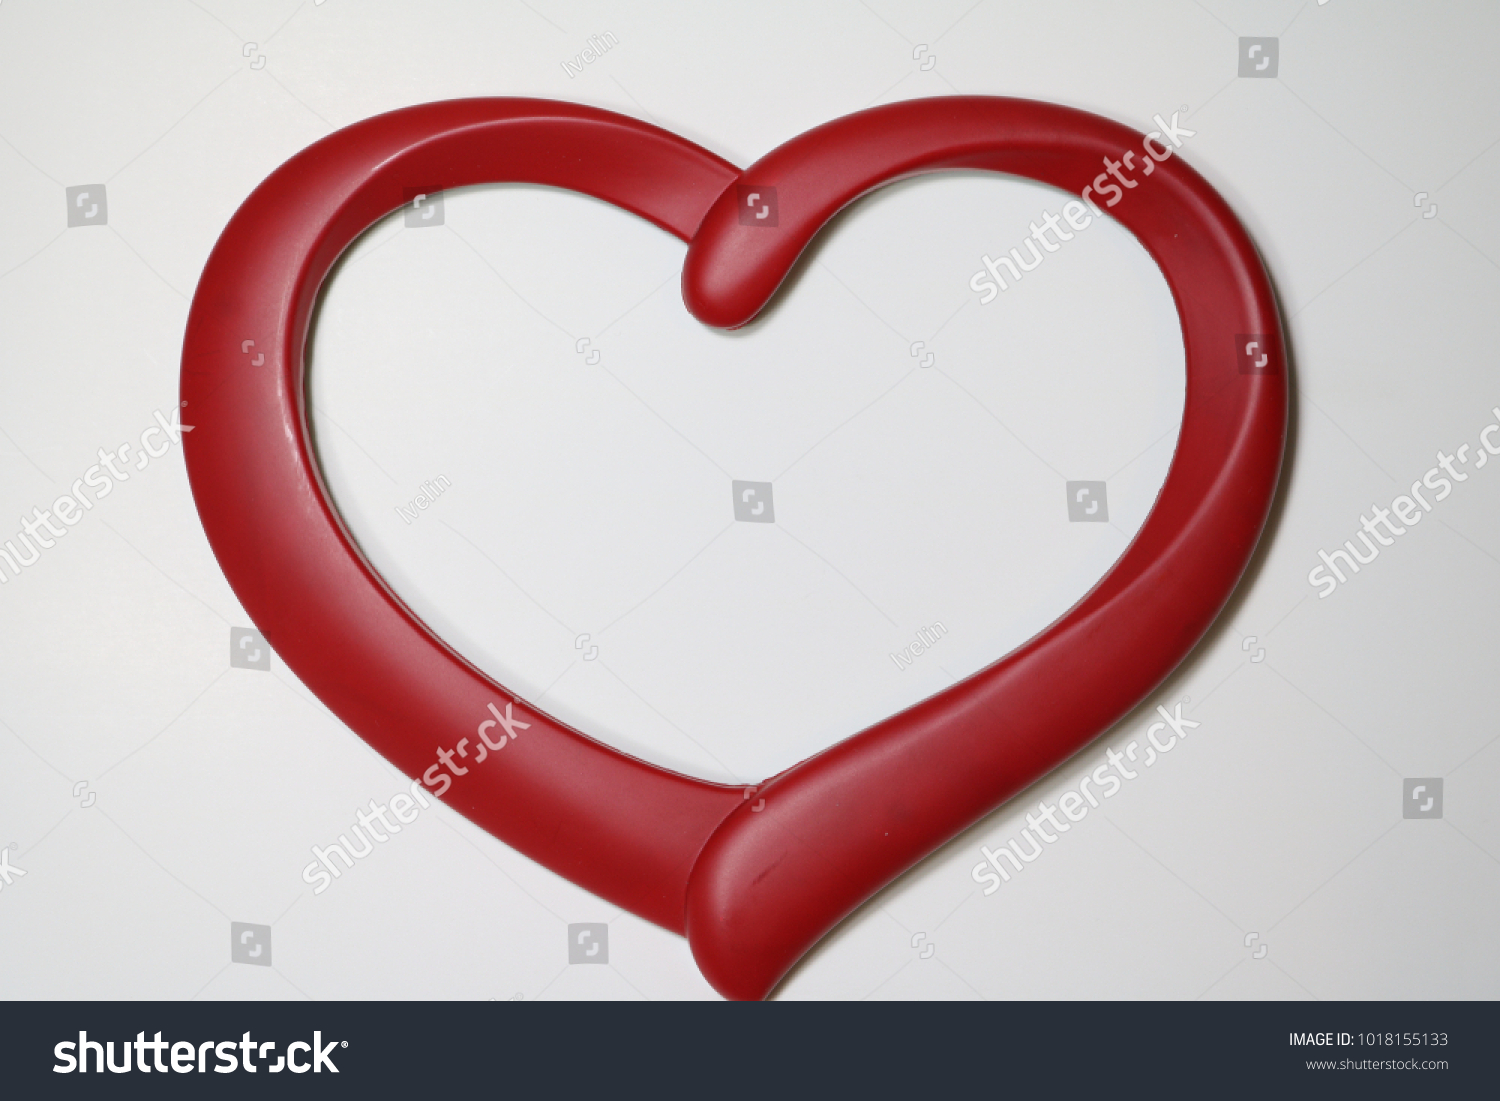 Decoration of red heart on white background #1018155133